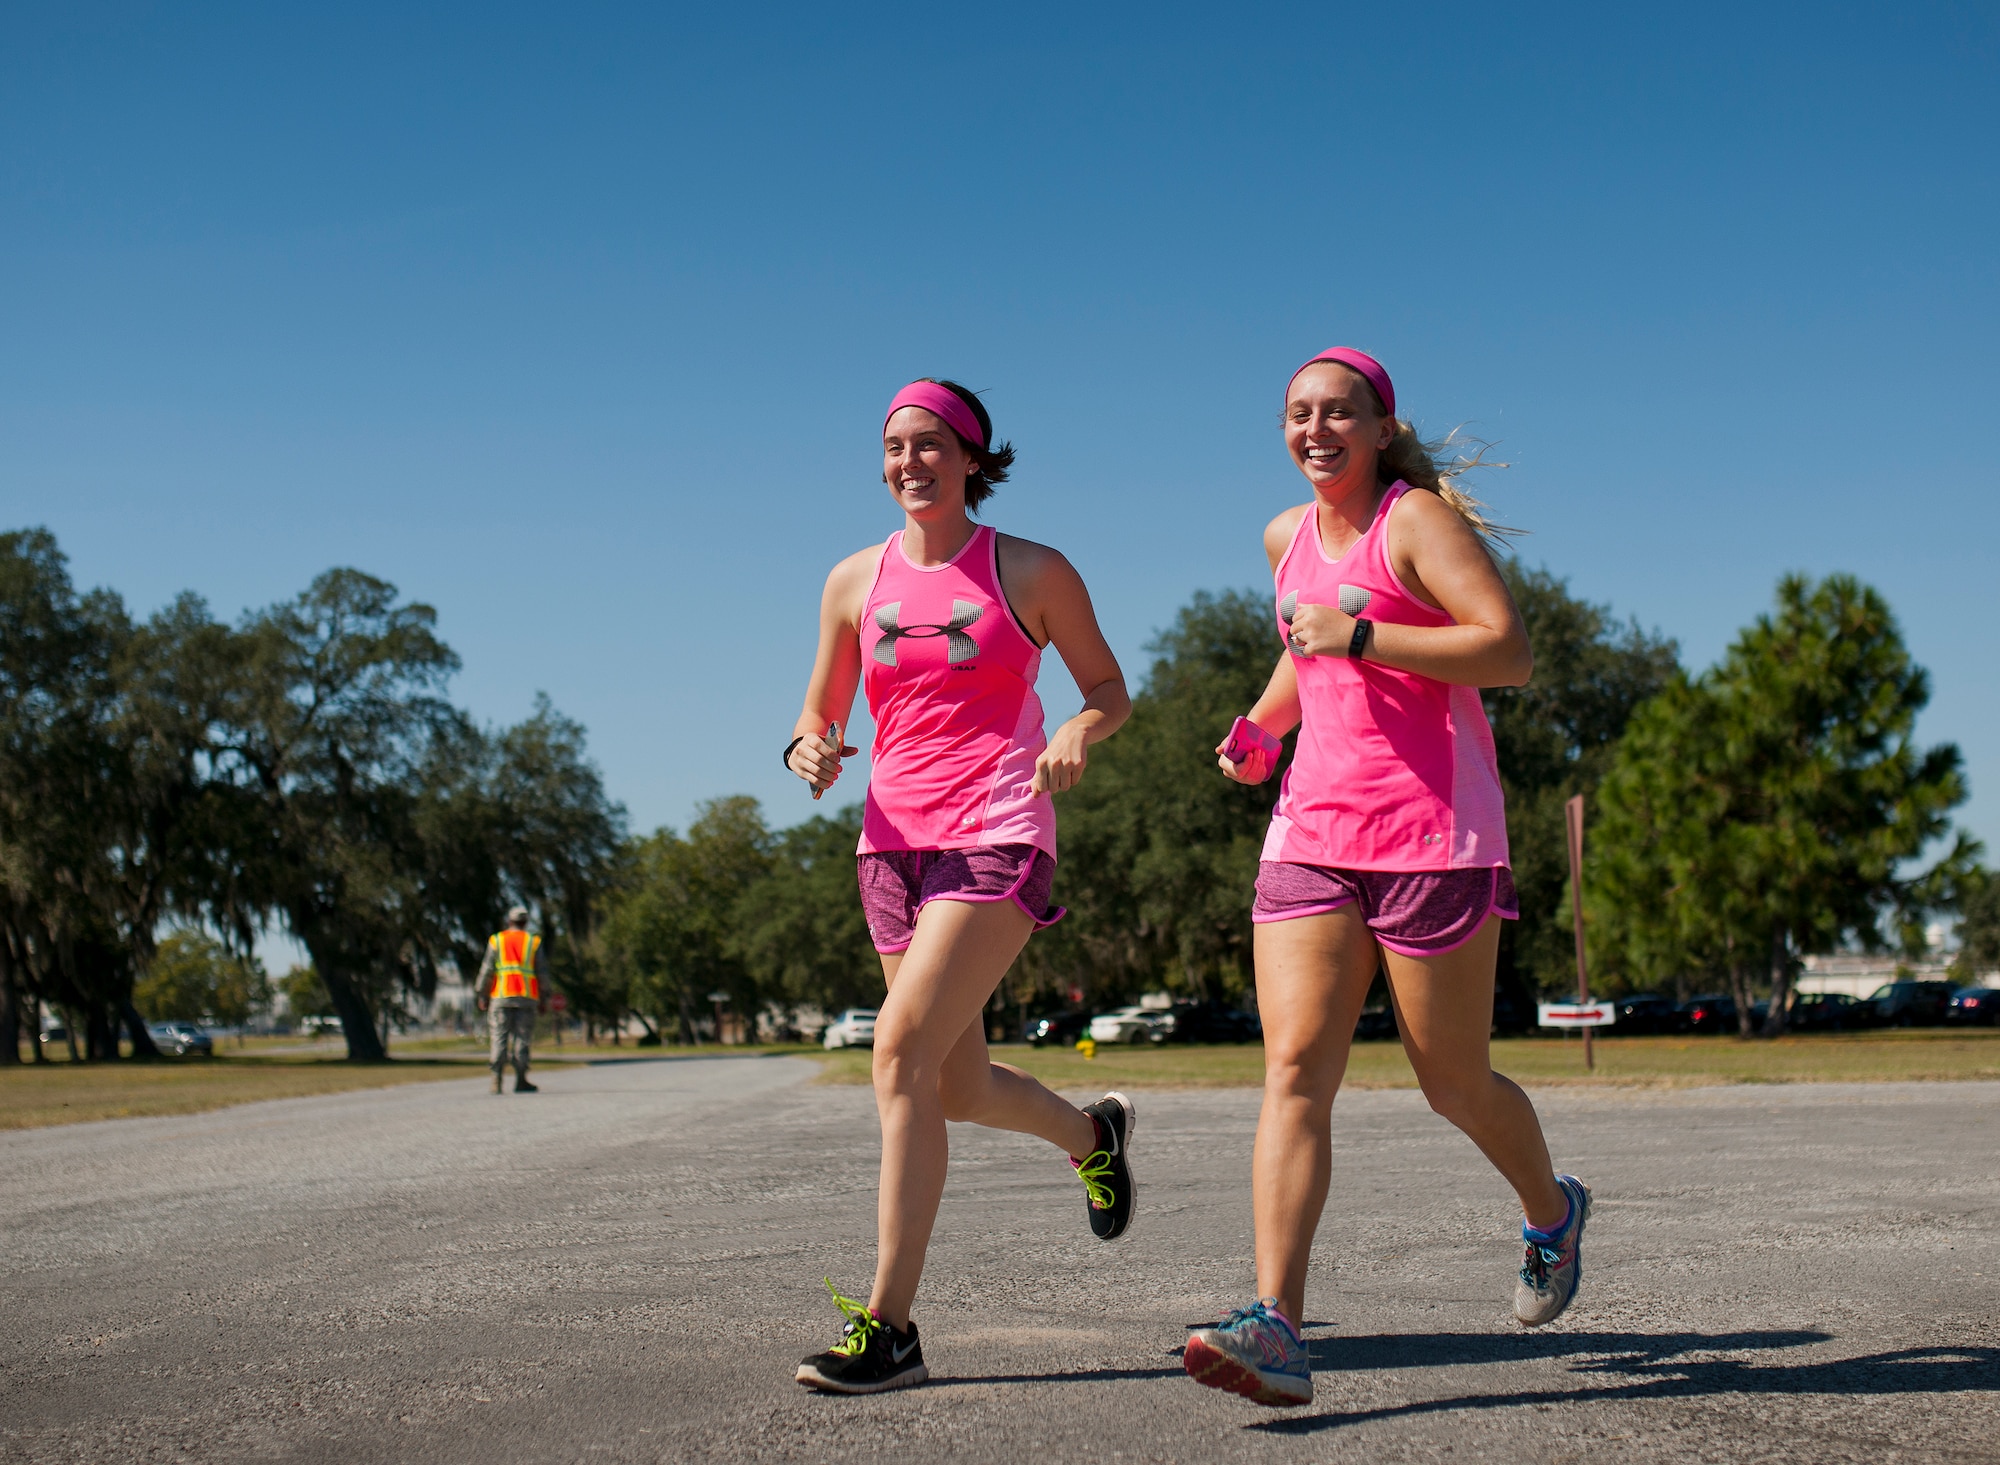 Runners dressed in pink jog to support the Eighth Annual Breast Cancer Awareness 5k run Oct. 17 at Eglin Air Force Base, Fla.  Eglin's health promotion flight was also on hand providing information on breast cancer risk factors, symptoms and screenings. The event was held to promote breast cancer awareness and the importance of self-examination to catch the disease in its early stages. More than 200 supporters came out to run.  (U.S. Air Force photo/Samuel King Jr.)